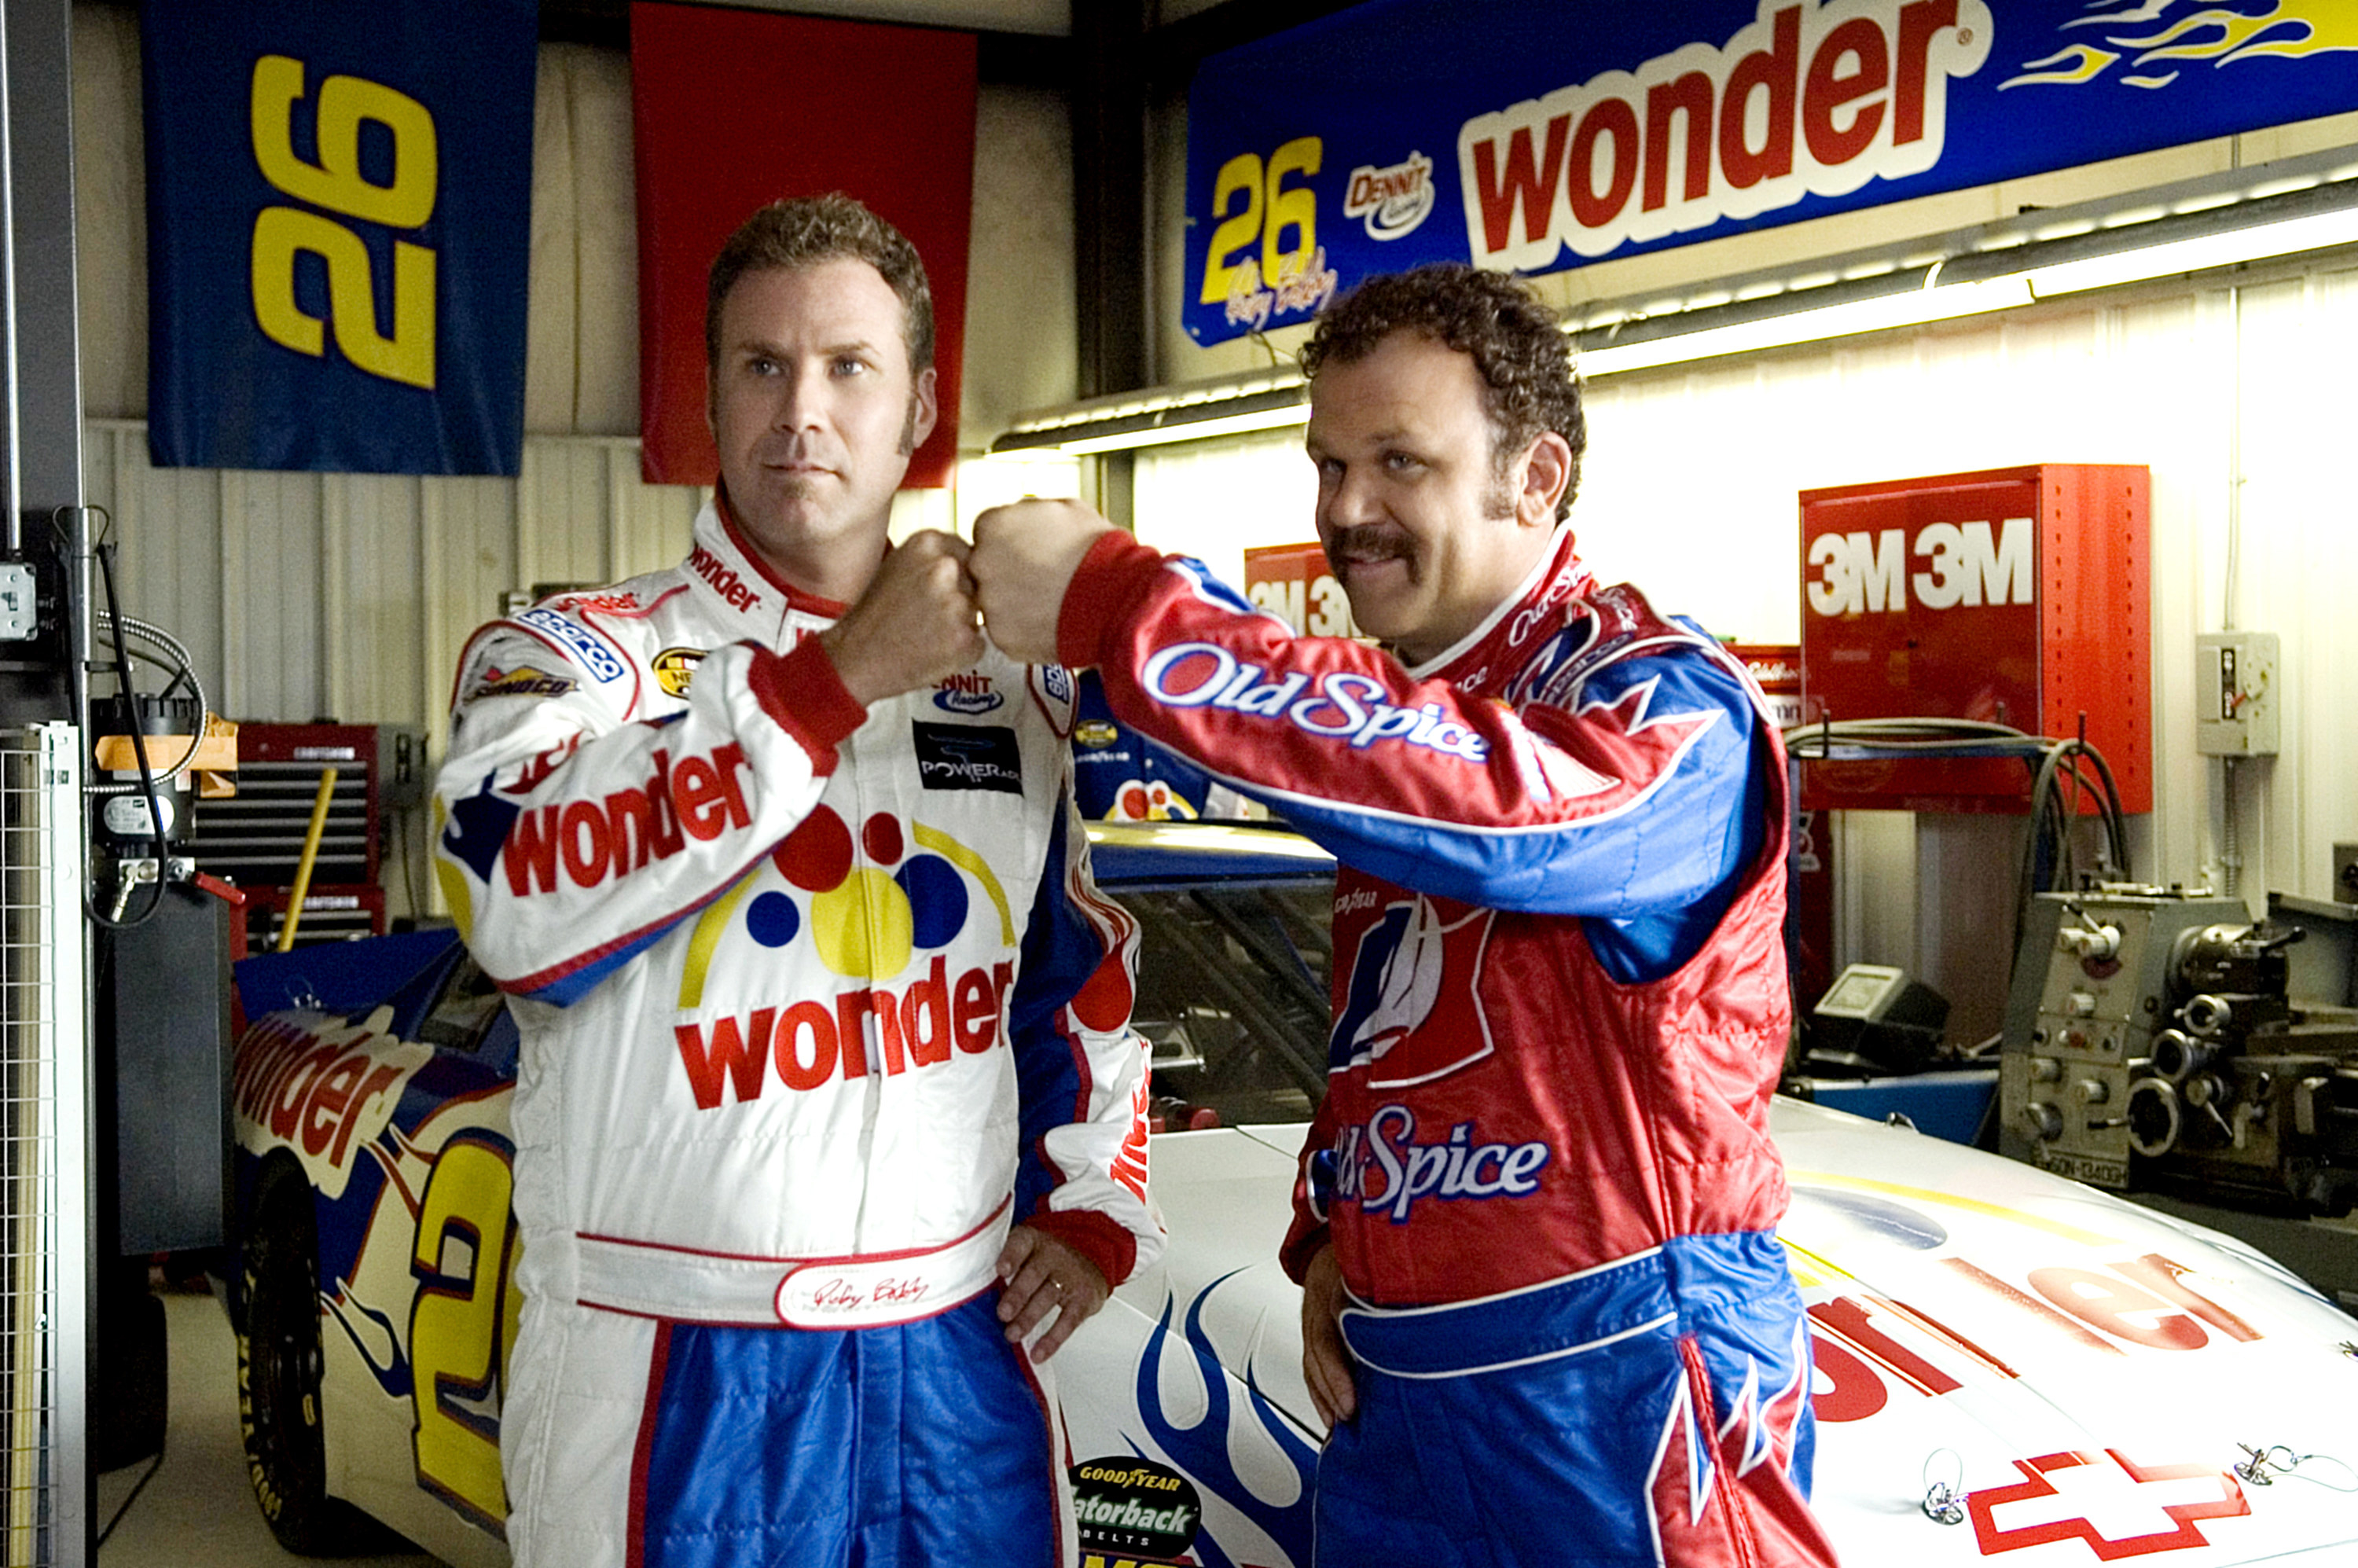 Ferrell and Reilly fist bump in Nascar gear in front of a car in a garage